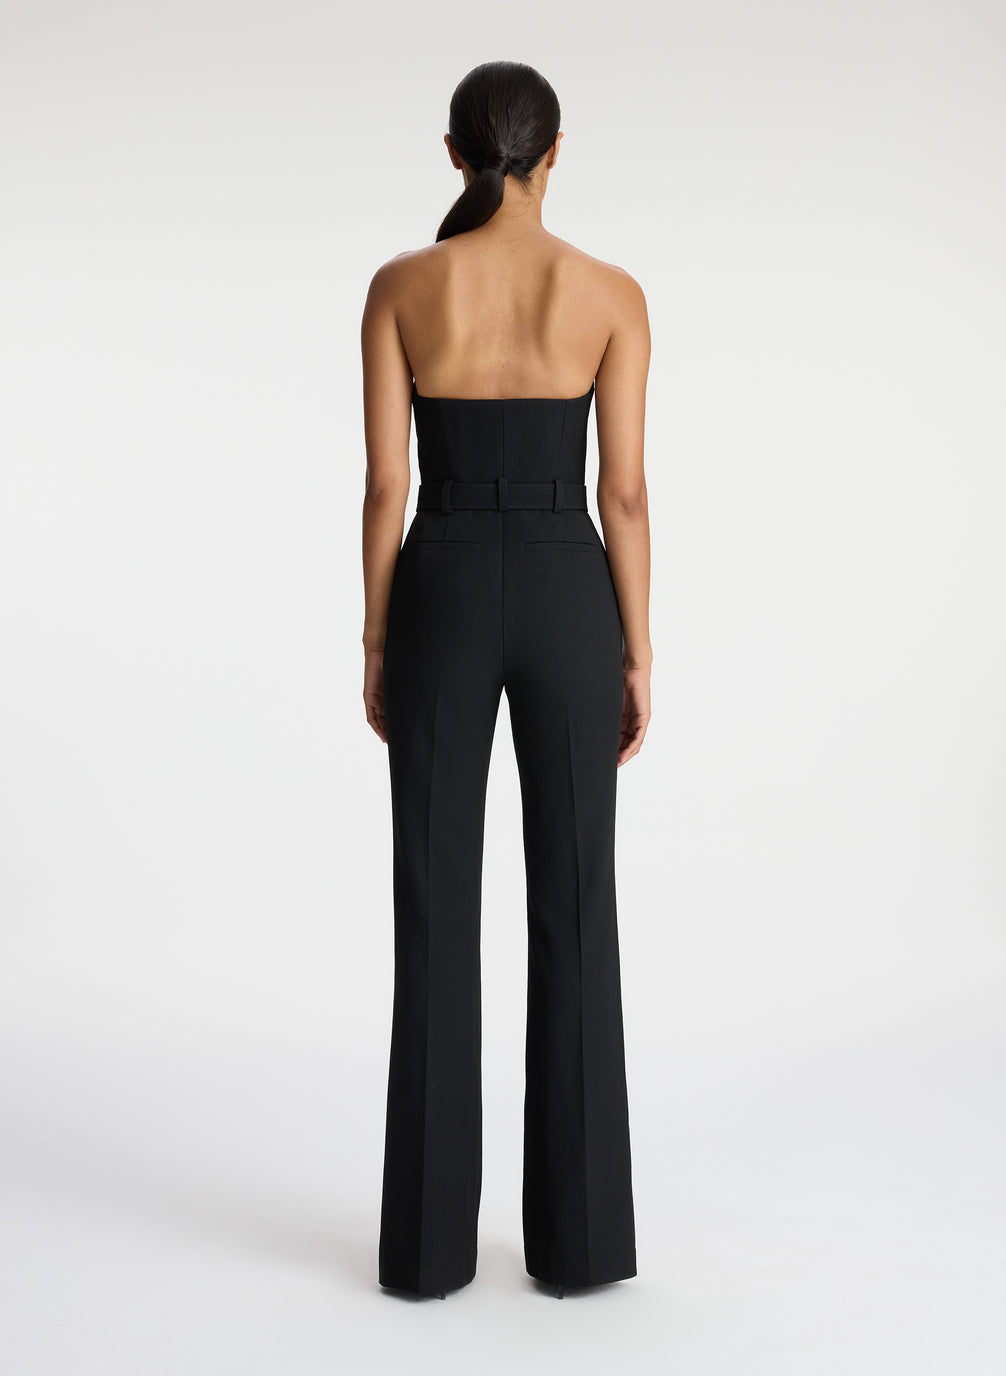 back view of woman wearing black strapless jumpsuit